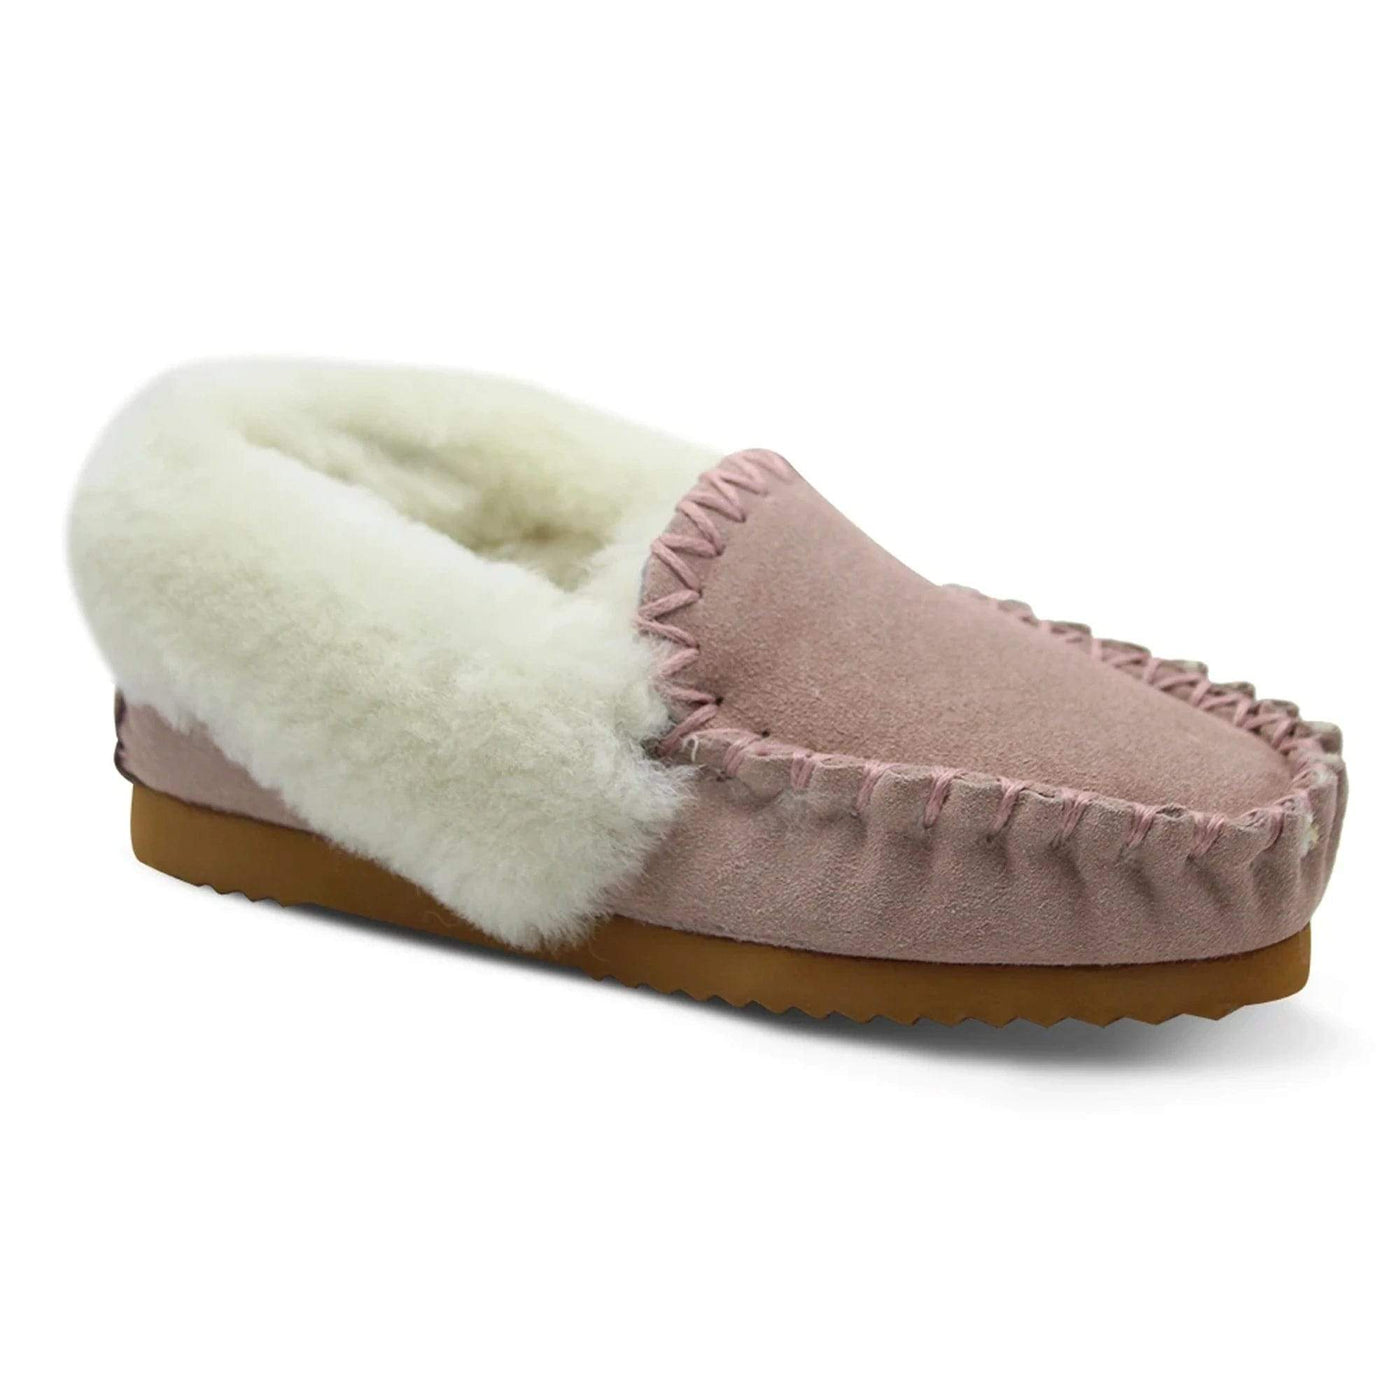 EMU Shoes Pale Pink / 6 RW10021 Molly Moccasin